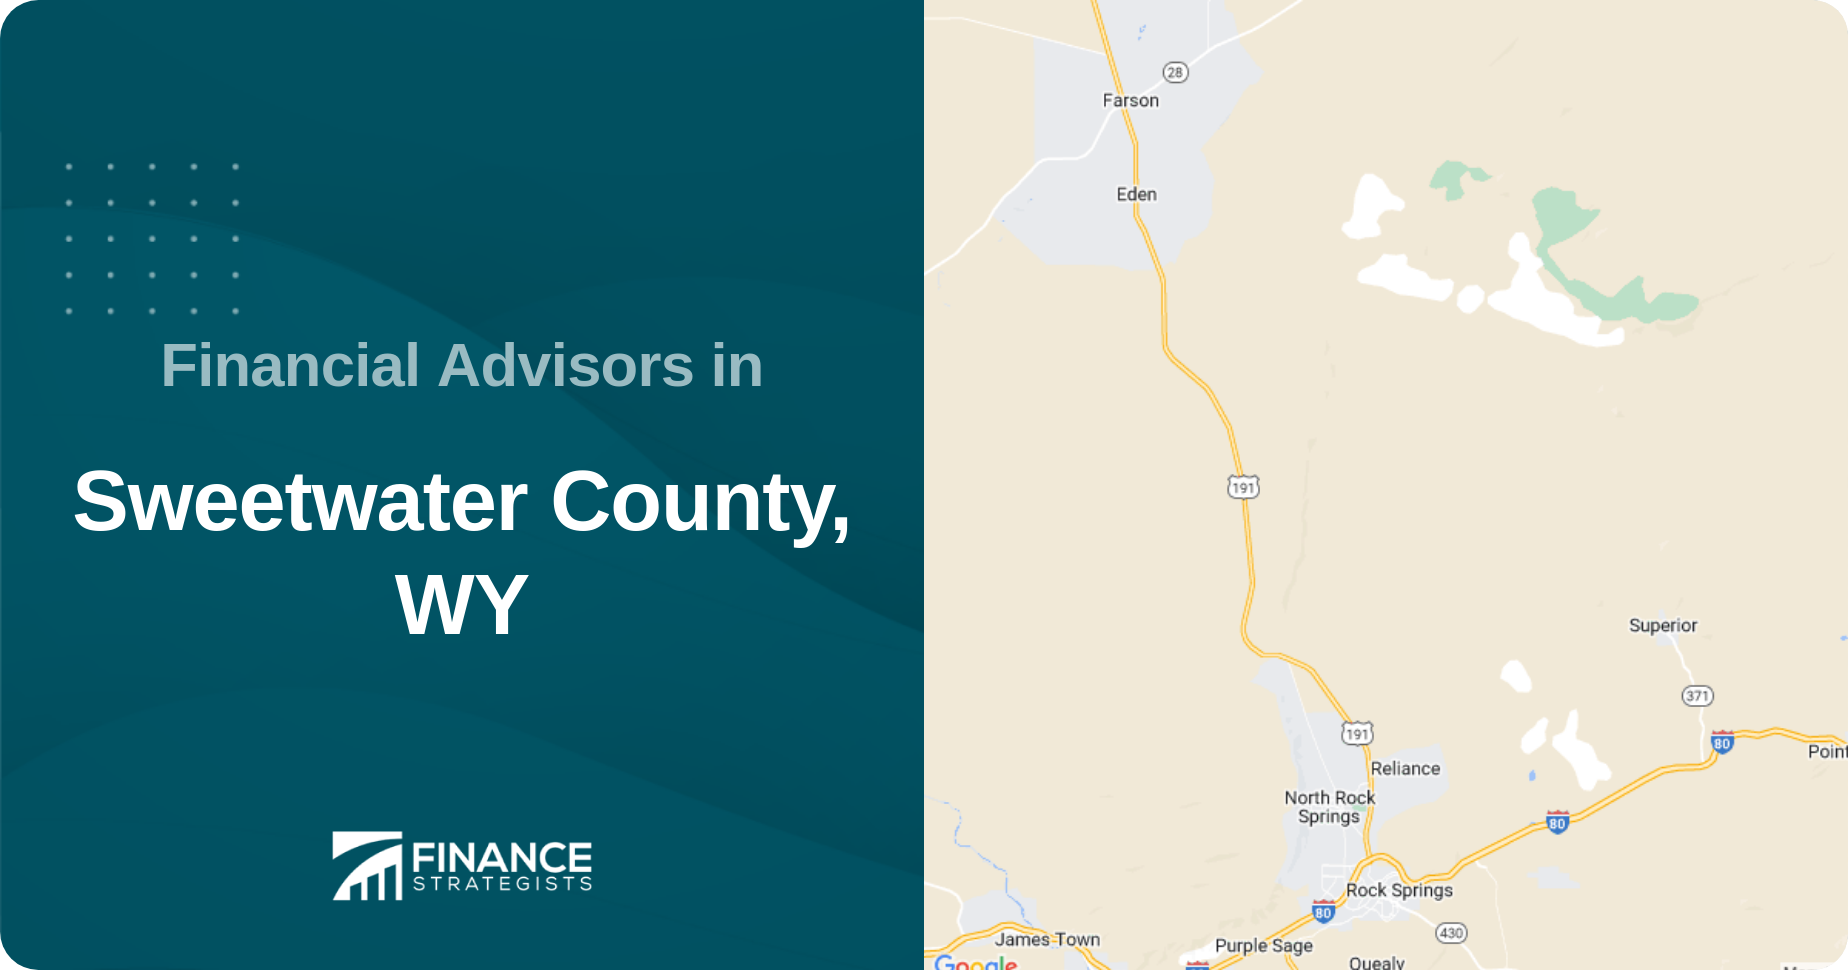 Financial Advisors in Sweetwater County, WY